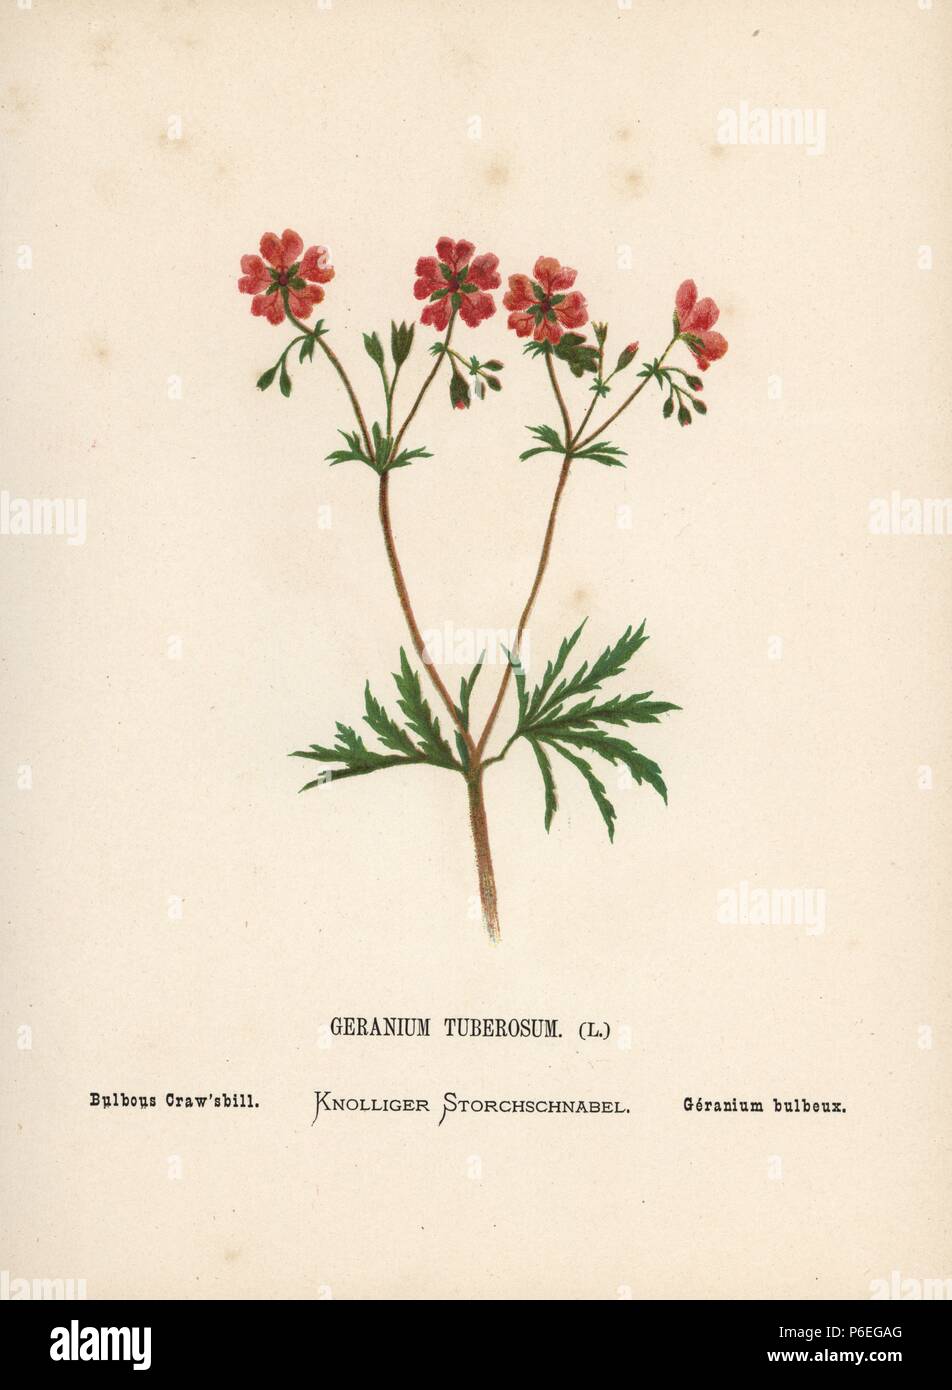 Bulbous craw's bill, Geranium tuberosum. Chromolithograph of a botanical illustration by Hannah Zeller from her own Wild Flowers of the Holy Land,' James Nisbet, London, 1876. Hannah Zeller (1838-1922) was a Swiss missionary who botanized near Nazareth for many years. Stock Photo